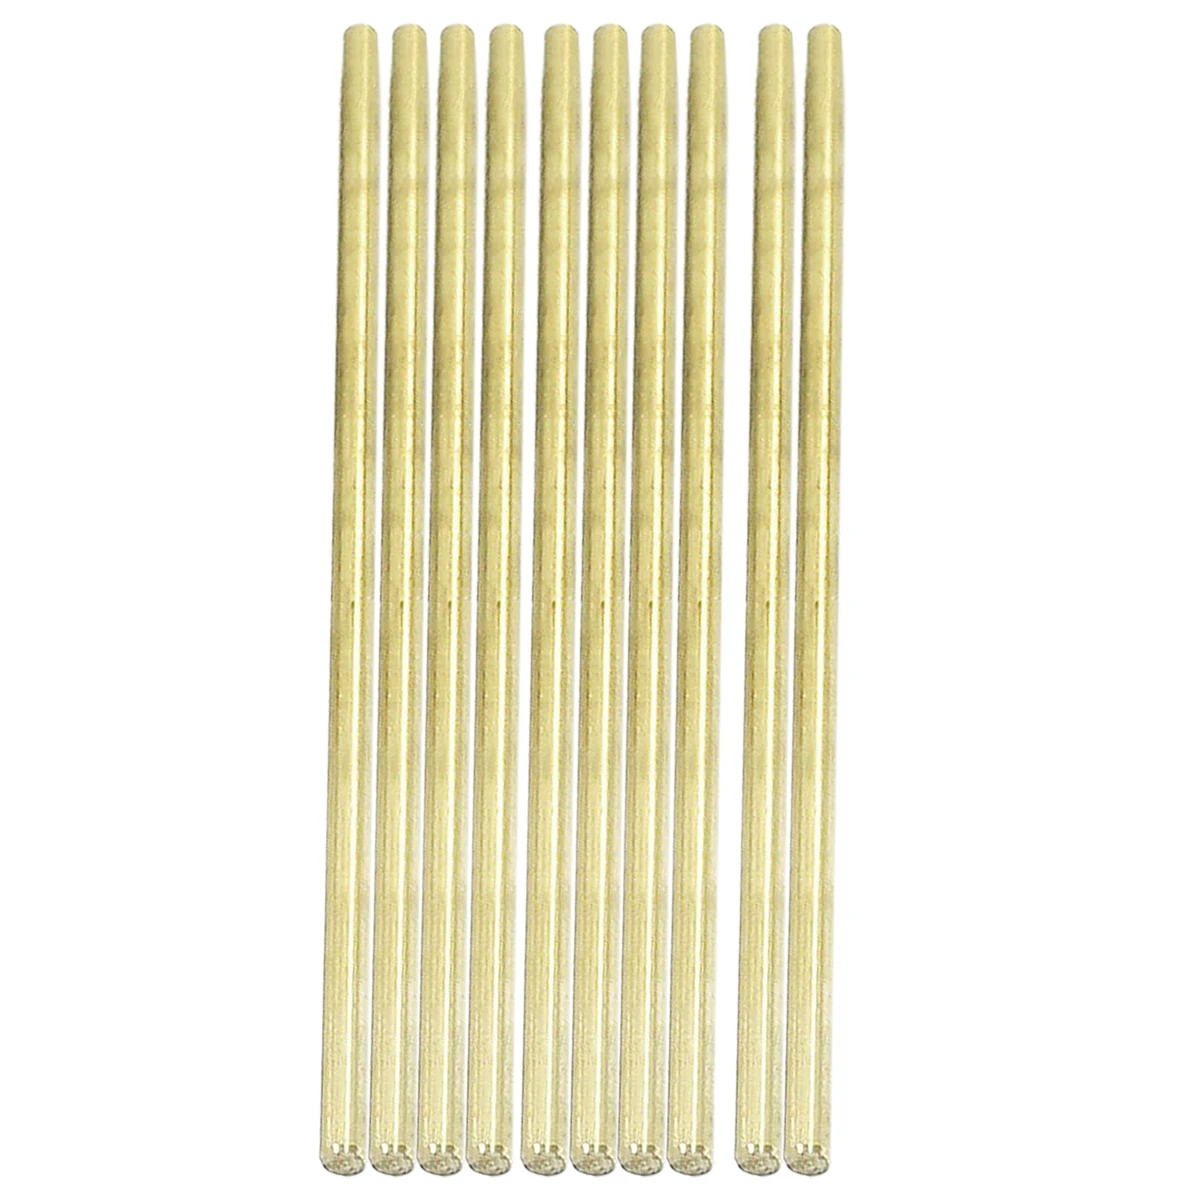 10pcs 1set  100mm Length 3mm Diameter Brass Round Rod Bar for RC Model Airplane Accessories